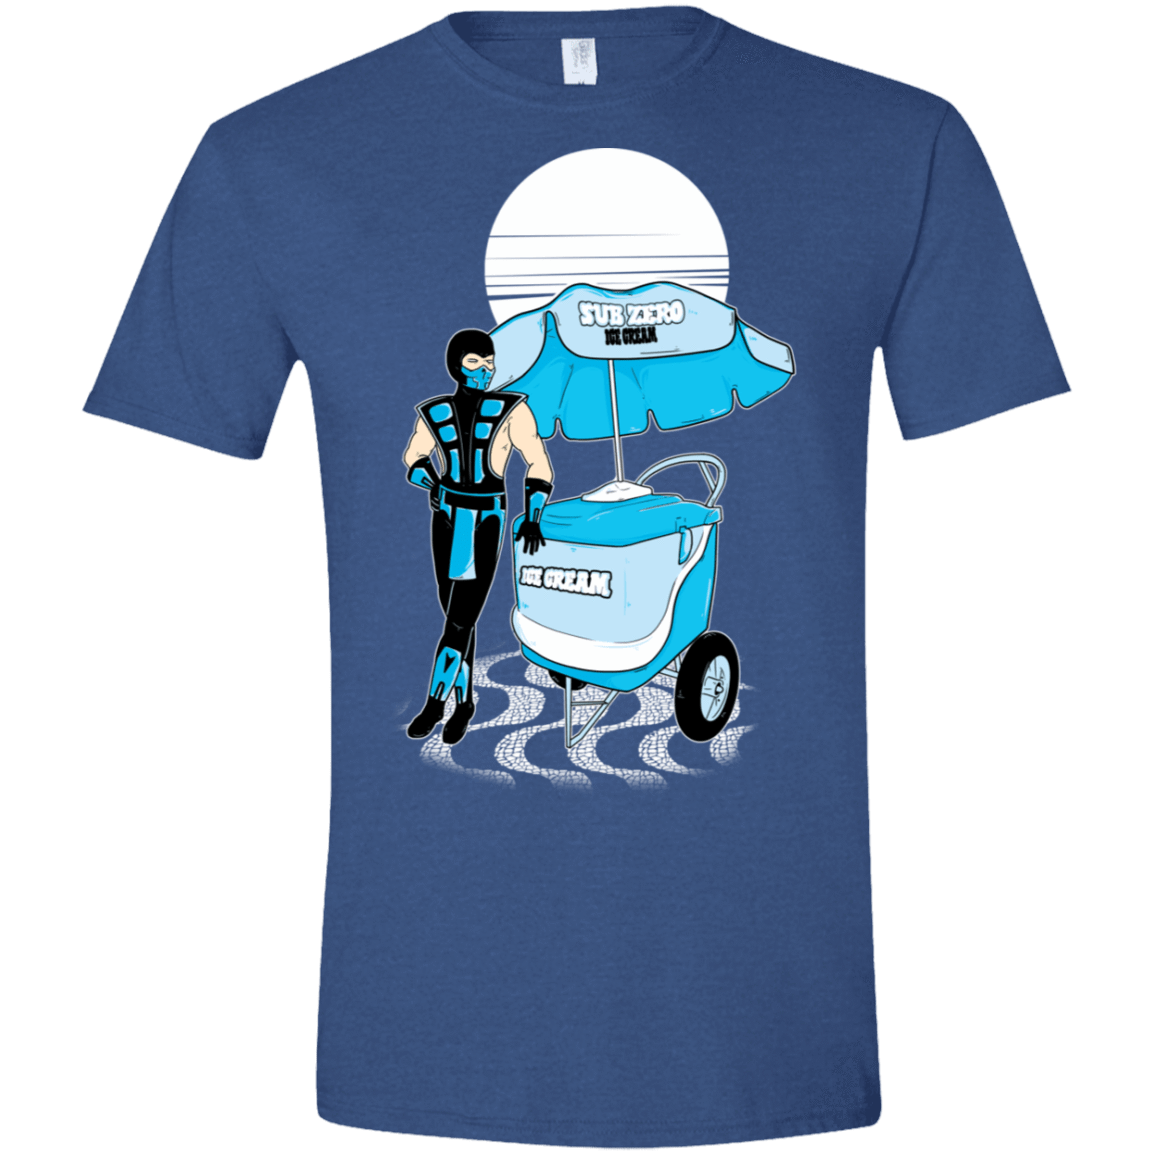 T-Shirts Heather Royal / X-Small Sub Zero Ice Cream Men's Semi-Fitted Softstyle